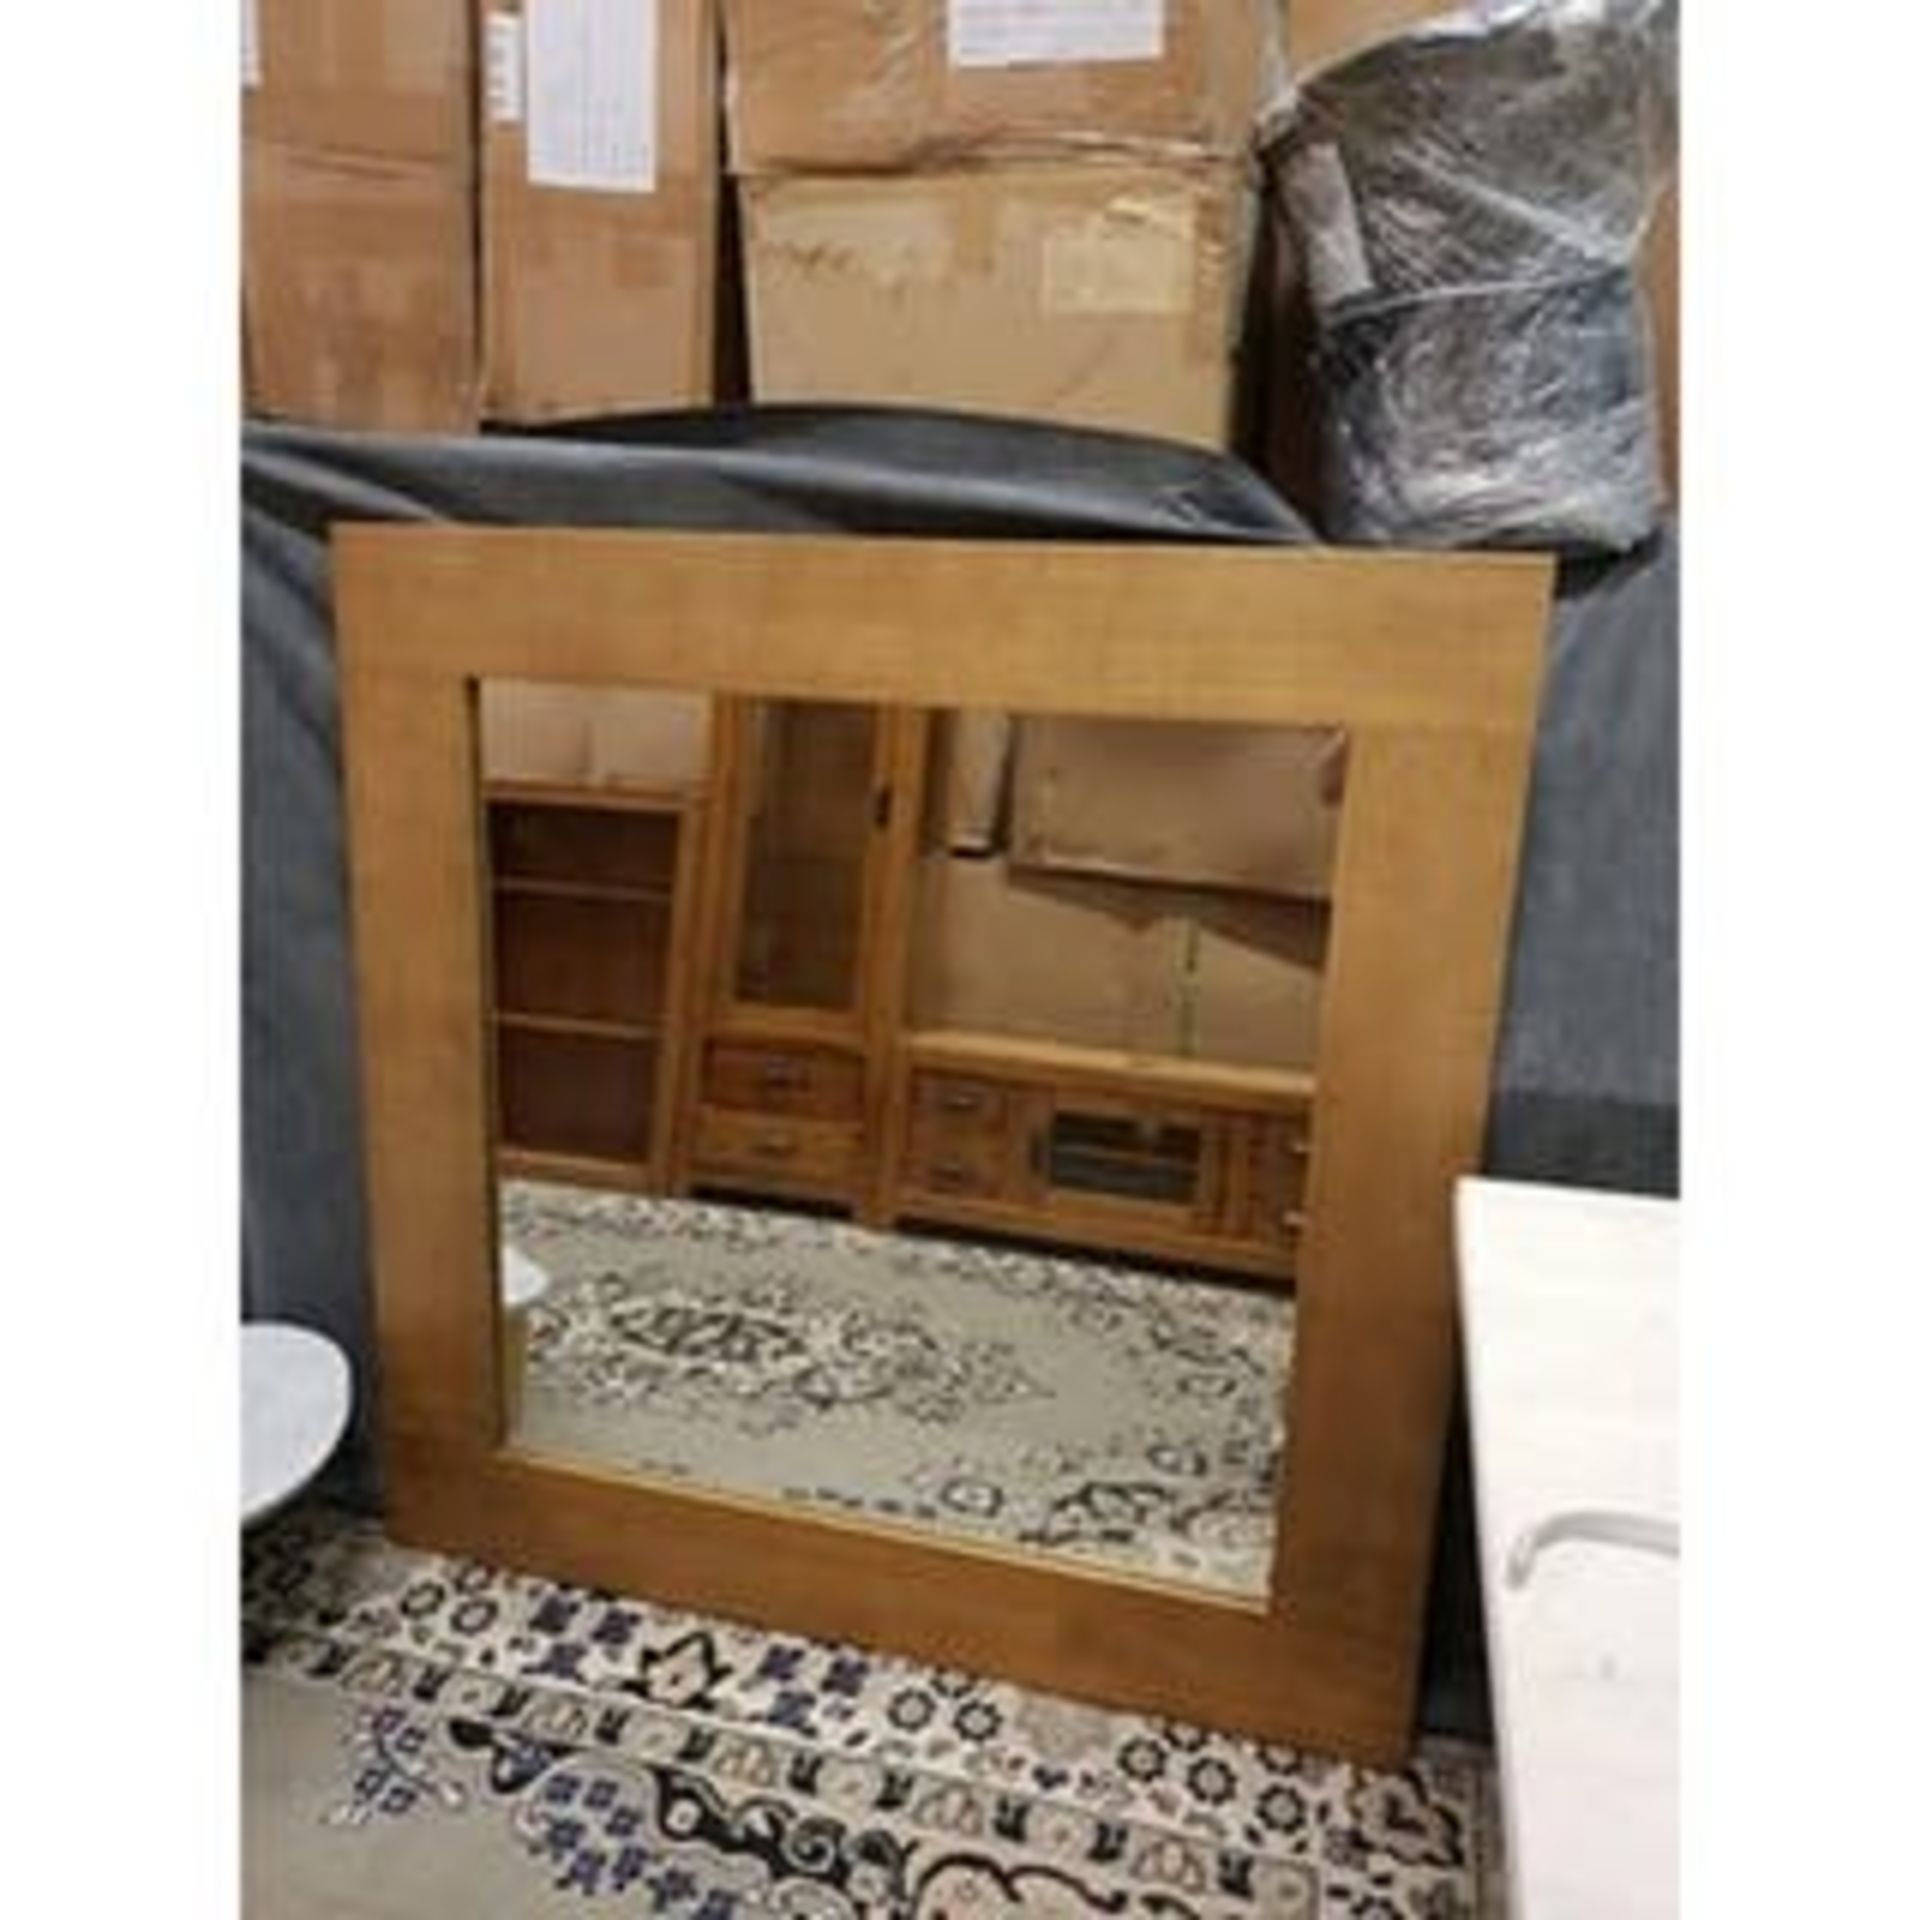 Marbelllo Square Rustic Mirror The Finishing Touches Make All The Difference In Your Room Decor,